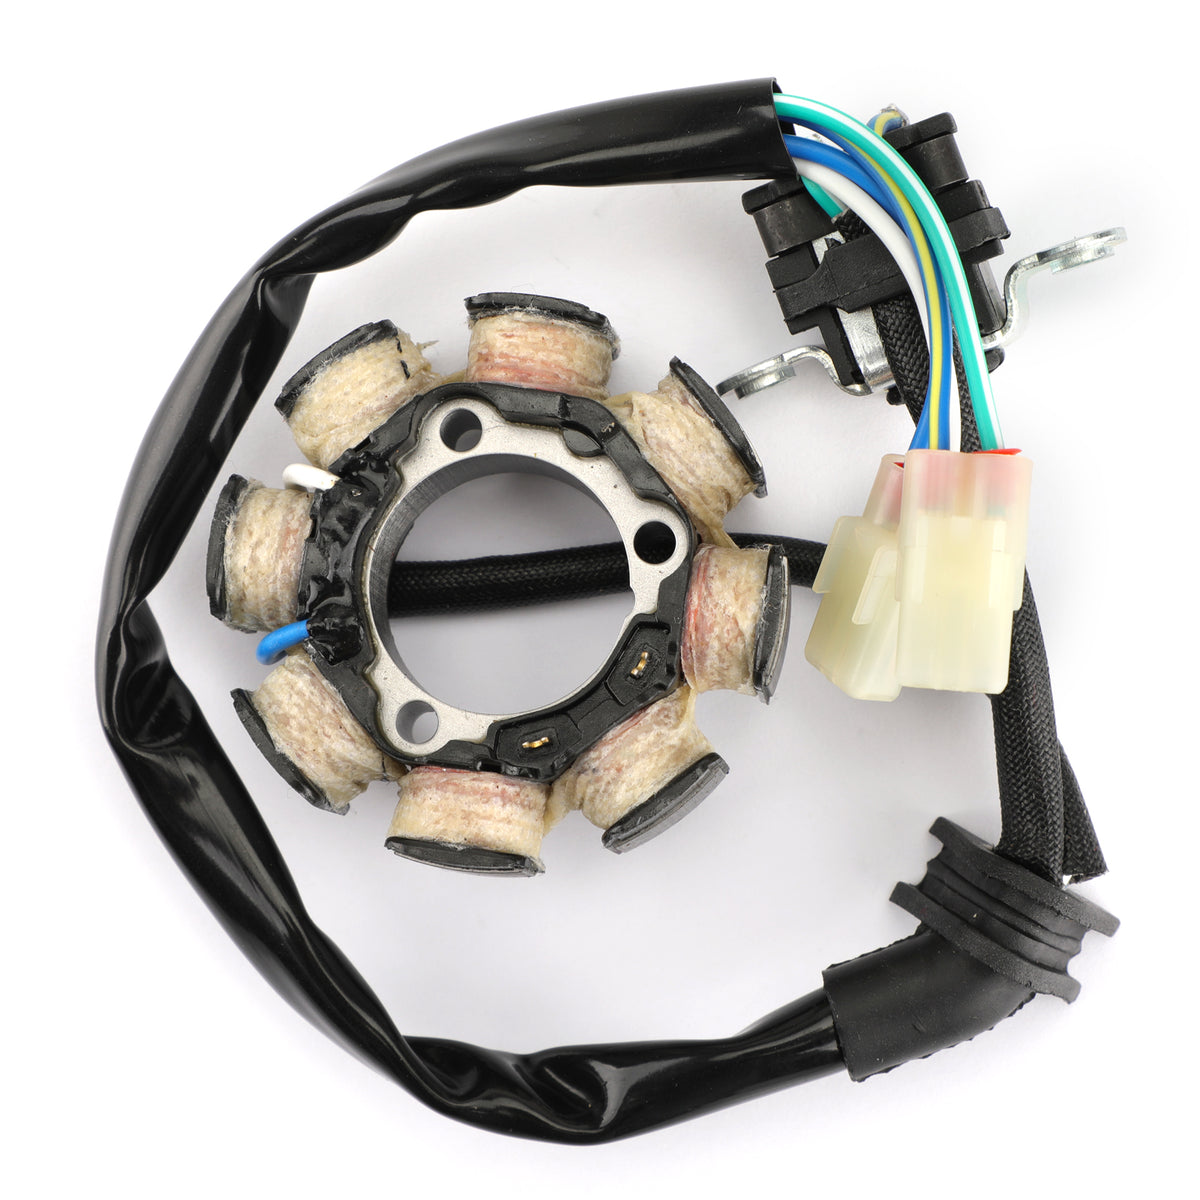 Magneto Generator Engine Stator Coil Fit For Honda CRF250 CRF250R 2004-2009 CRF450R 2005-2008